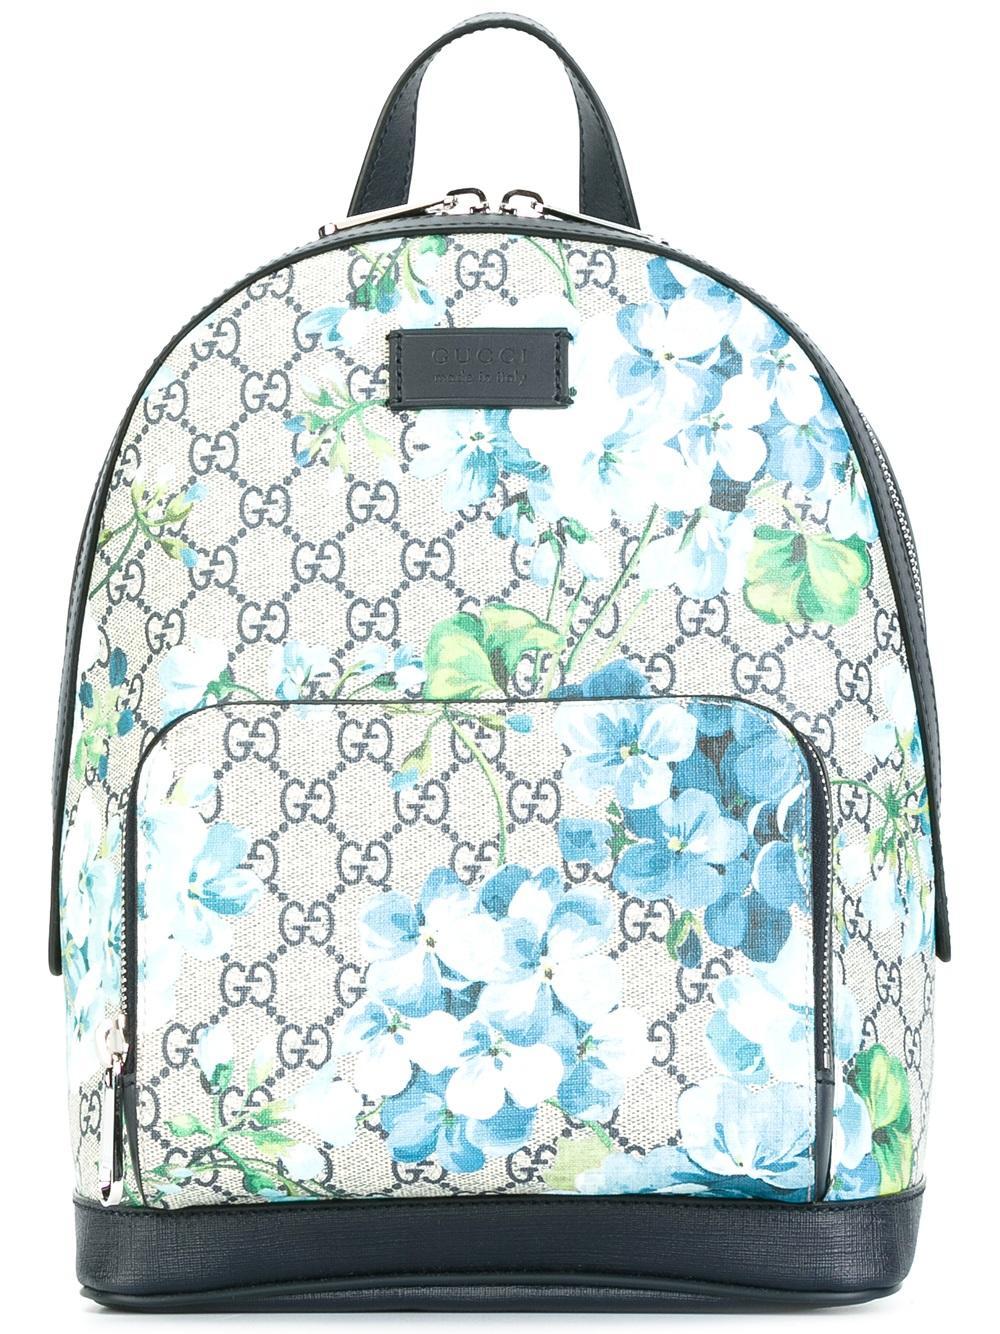 konstruktion crush Gemme Gucci Gg Blooms Supreme Small Backpack in Blue | Lyst